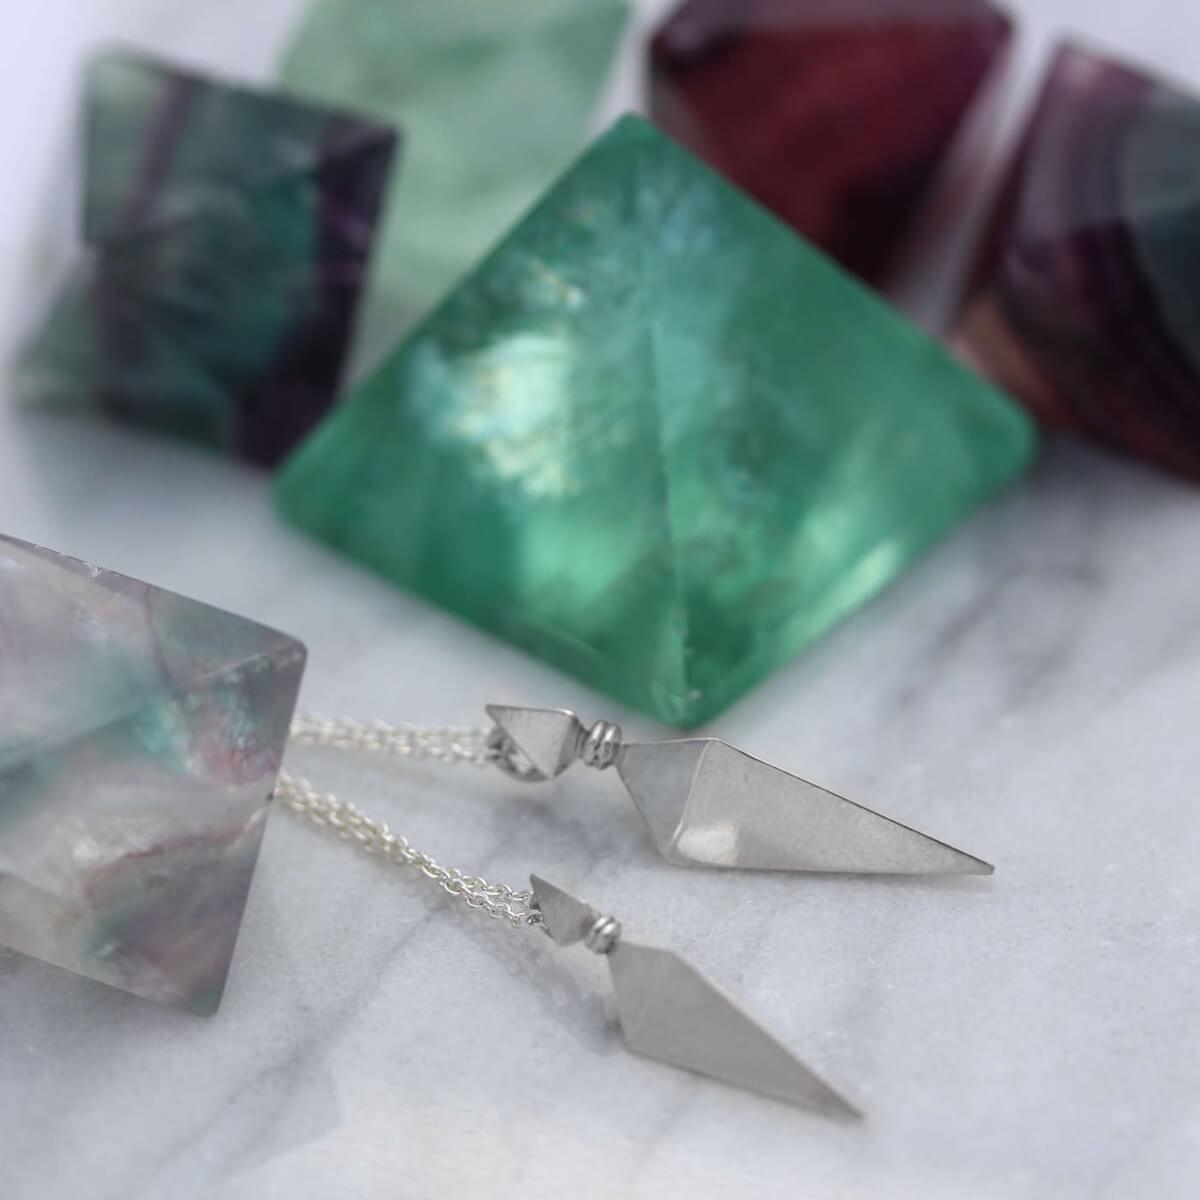 Large and Small Silver Pyramid Spike Pendants on Silver Chains with Fluorite Crystals